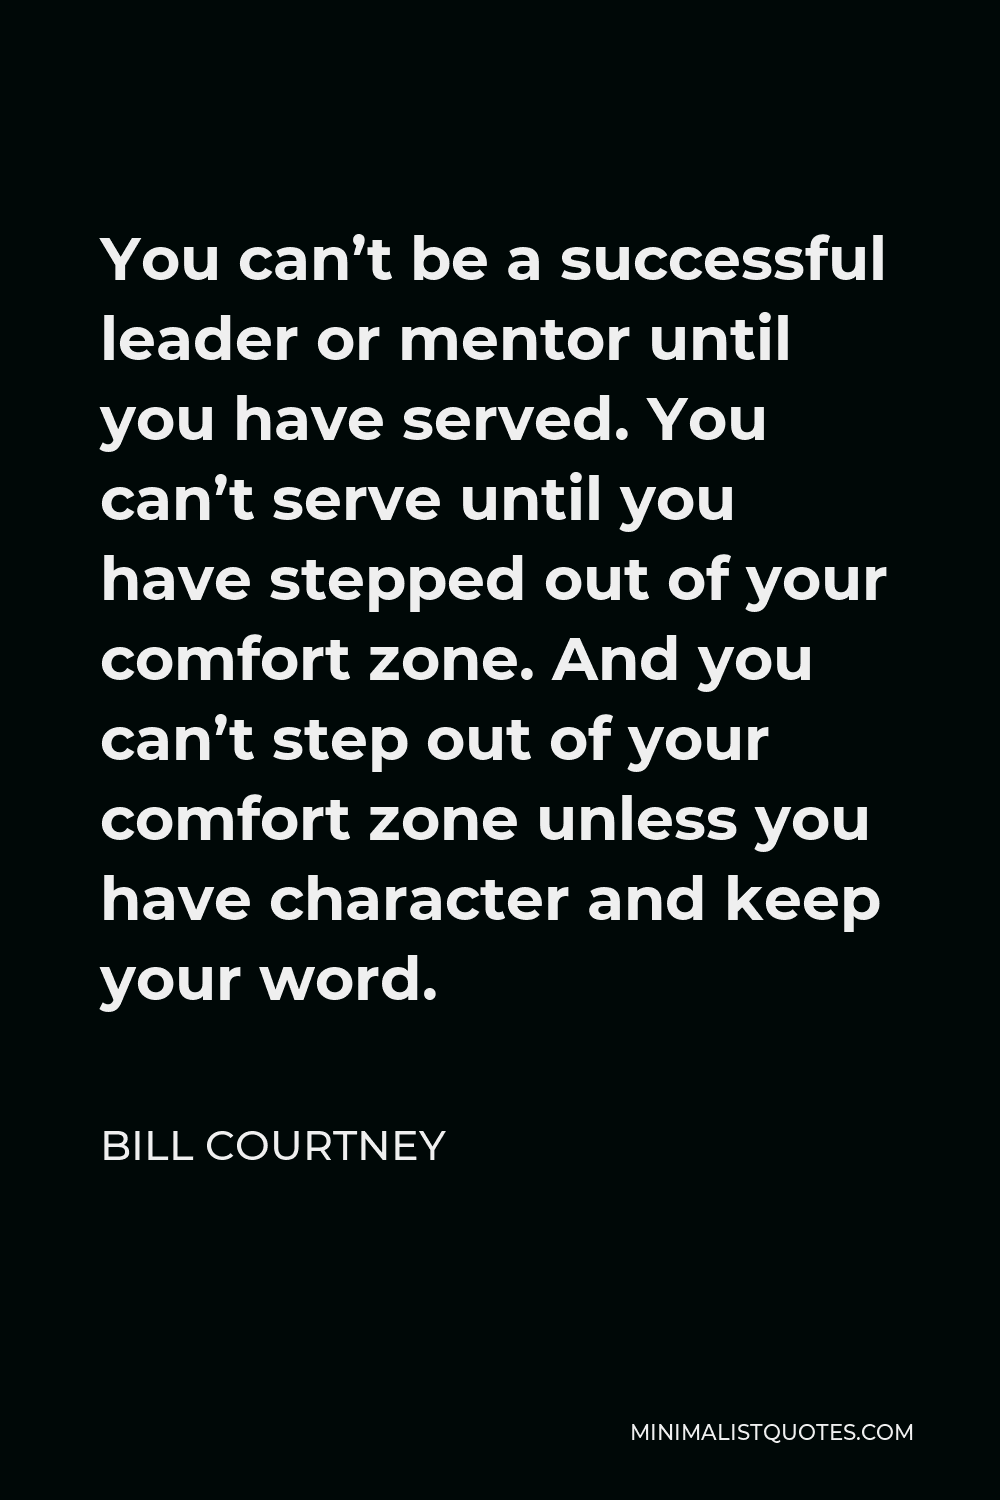 Bill Courtney Quote - You can’t be a successful leader or mentor until you have served. You can’t serve until you have stepped out of your comfort zone. And you can’t step out of your comfort zone unless you have character and keep your word.